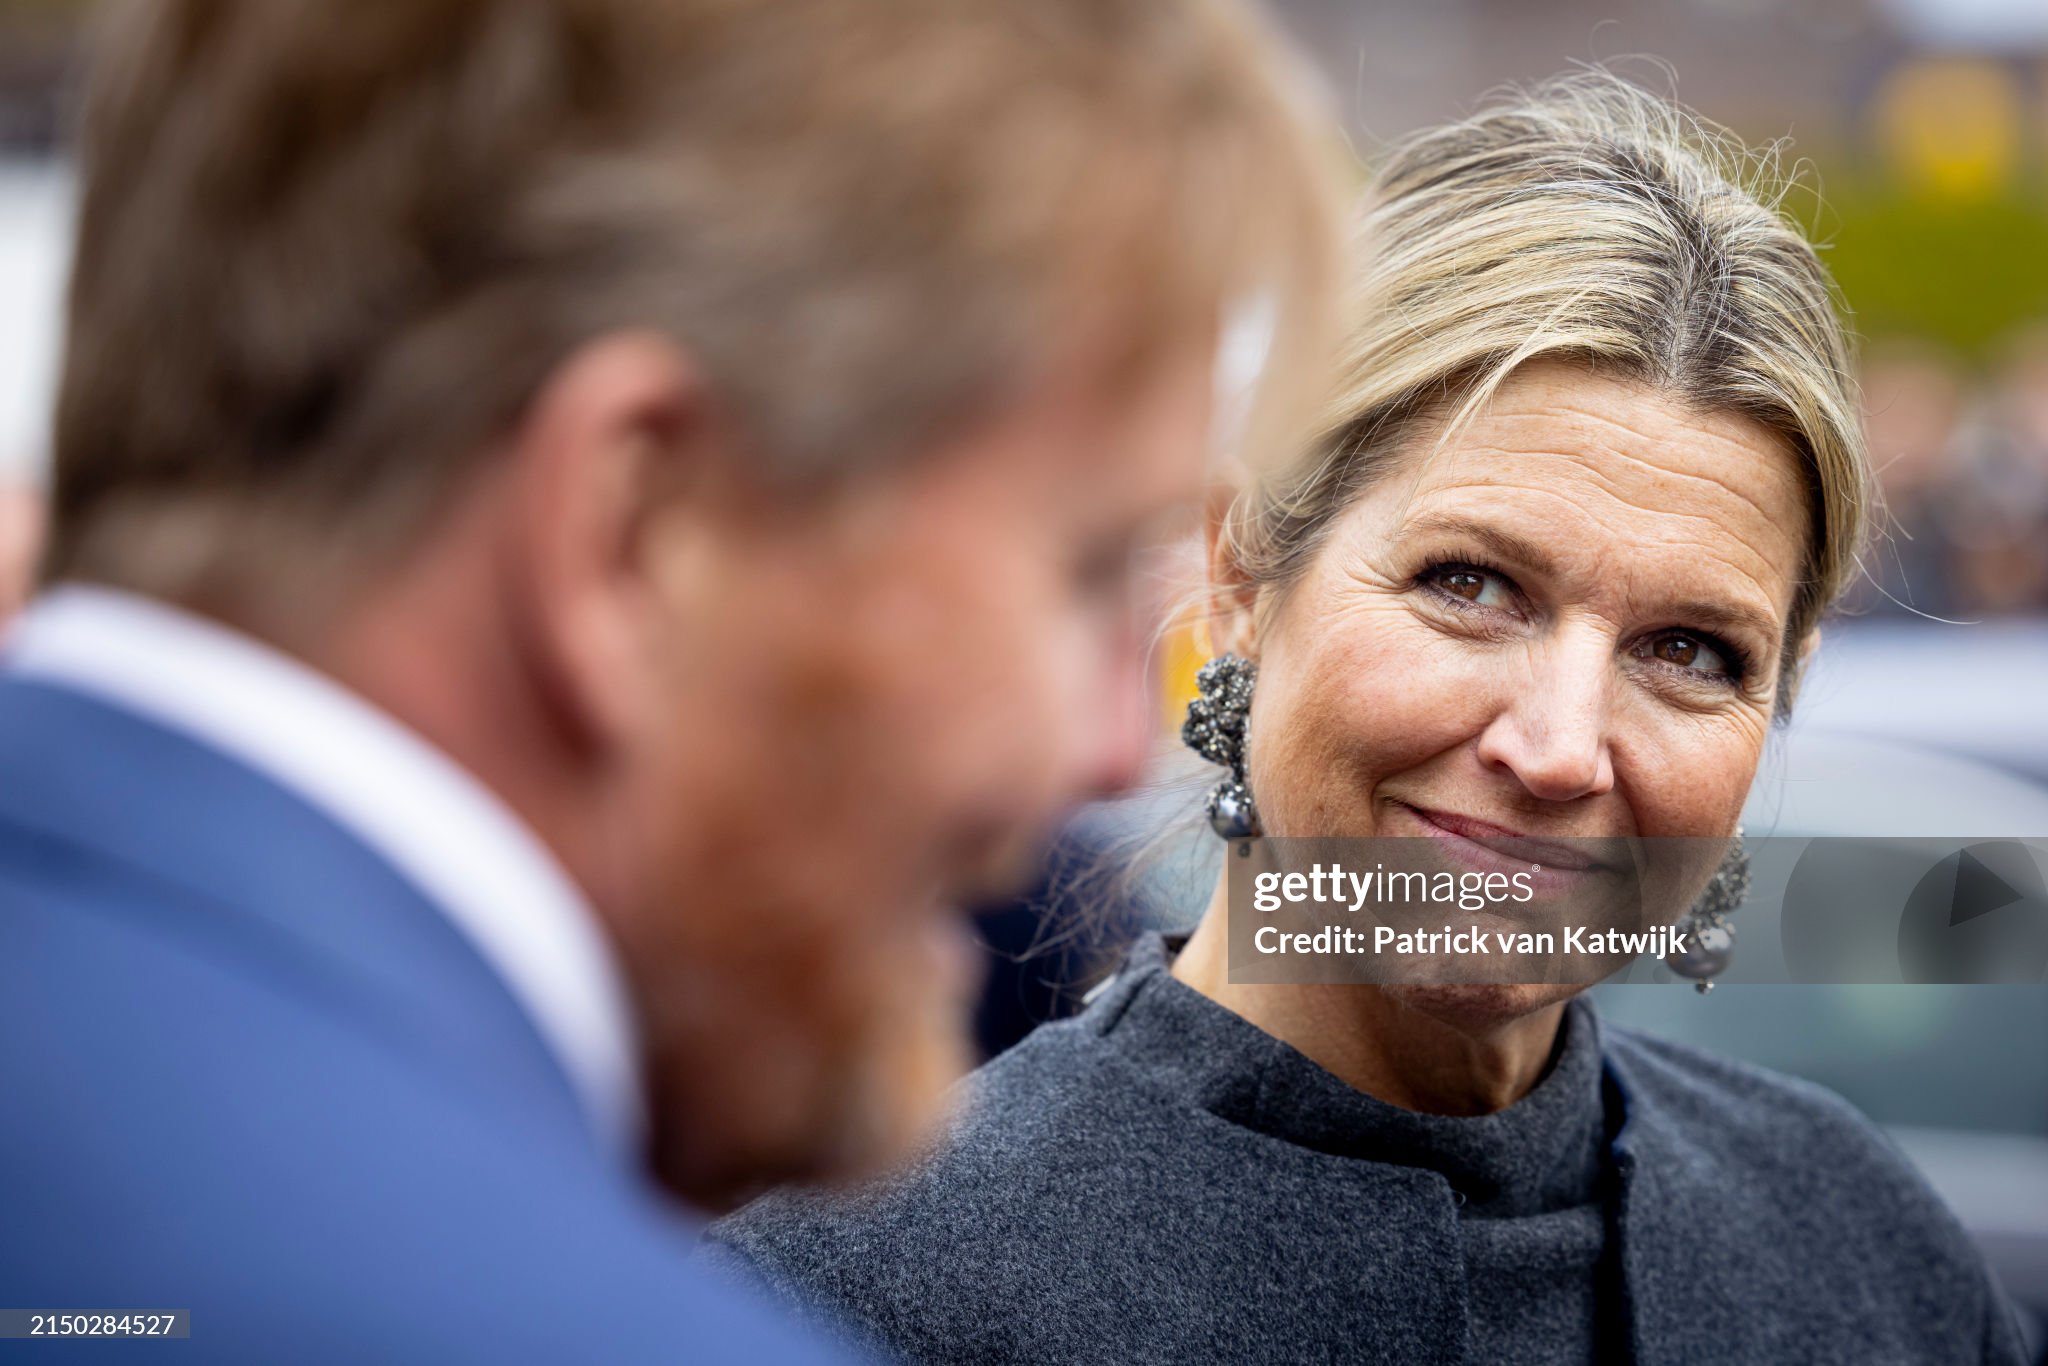 king-willem-alexander-queen-maxima-of-the-netherlands-visits-attend-the-kinsgame-in-hoofddorp.jpg?s=2048x2048&w=gi&k=20&c=EfT3I08QP31FULhkGM3QVXW7vSHi5WKC9Q-xH3GeeAI=